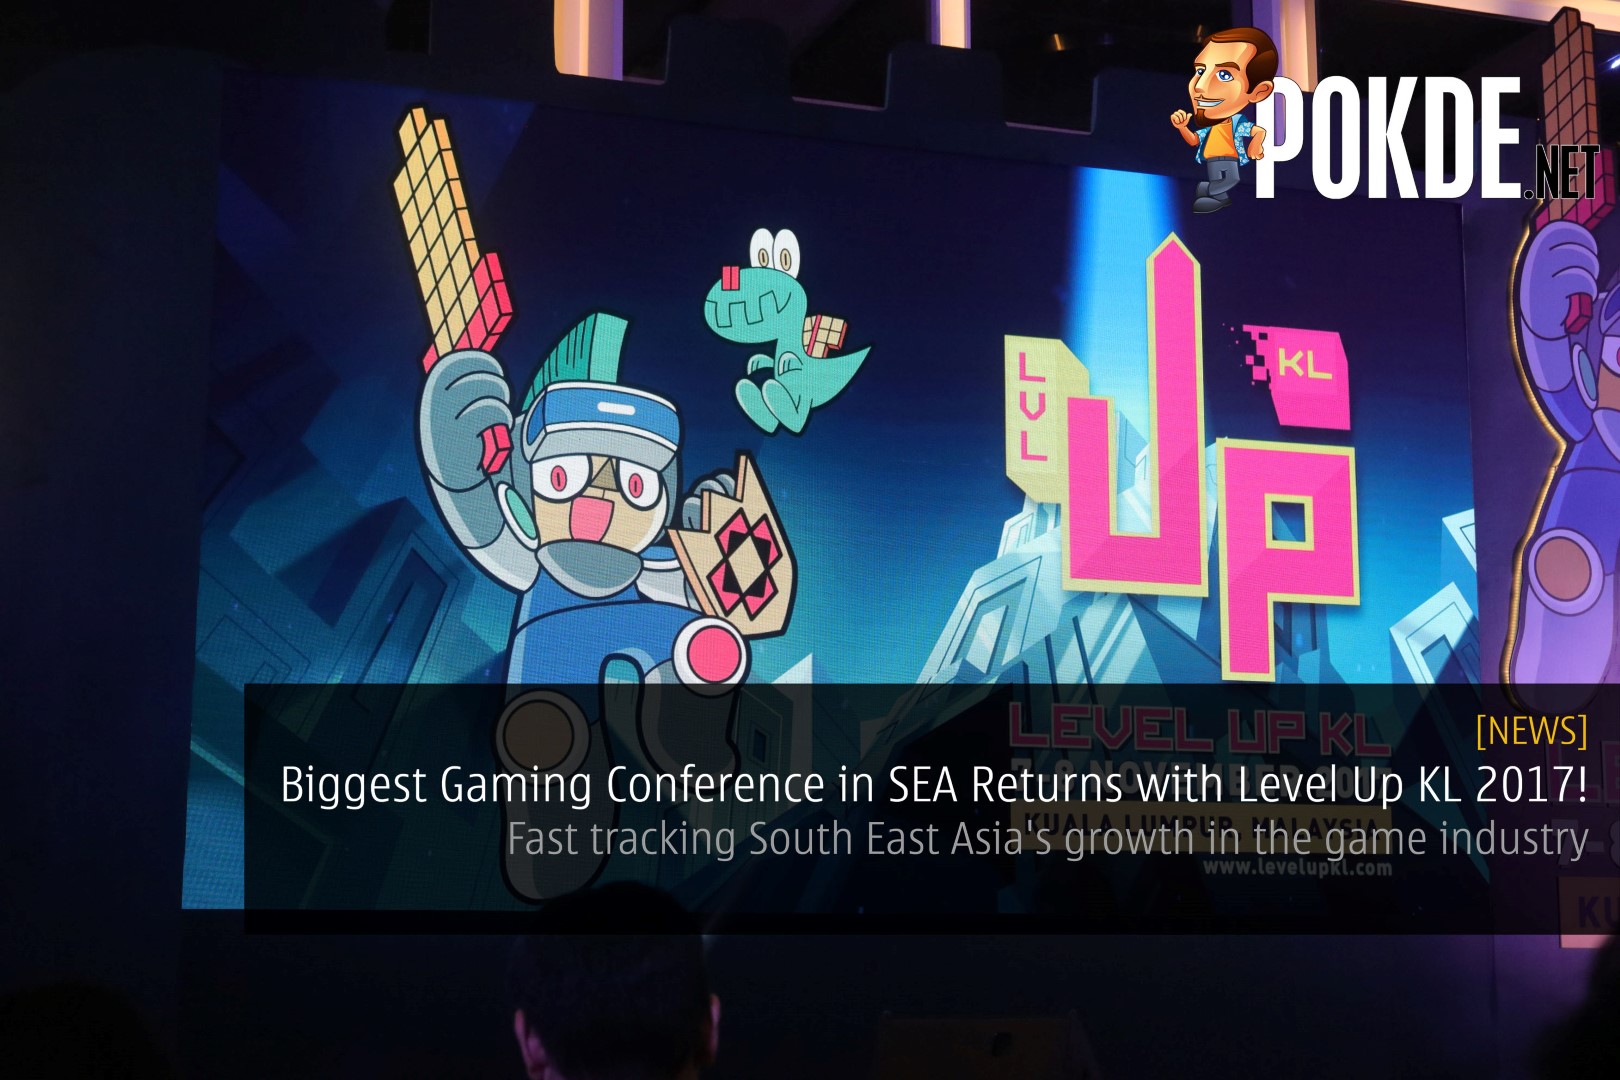 Biggest Gaming Conference in SEA Returns with Level Up KL 2017! - Fast tracking South East Asia's growth in the game industry 29